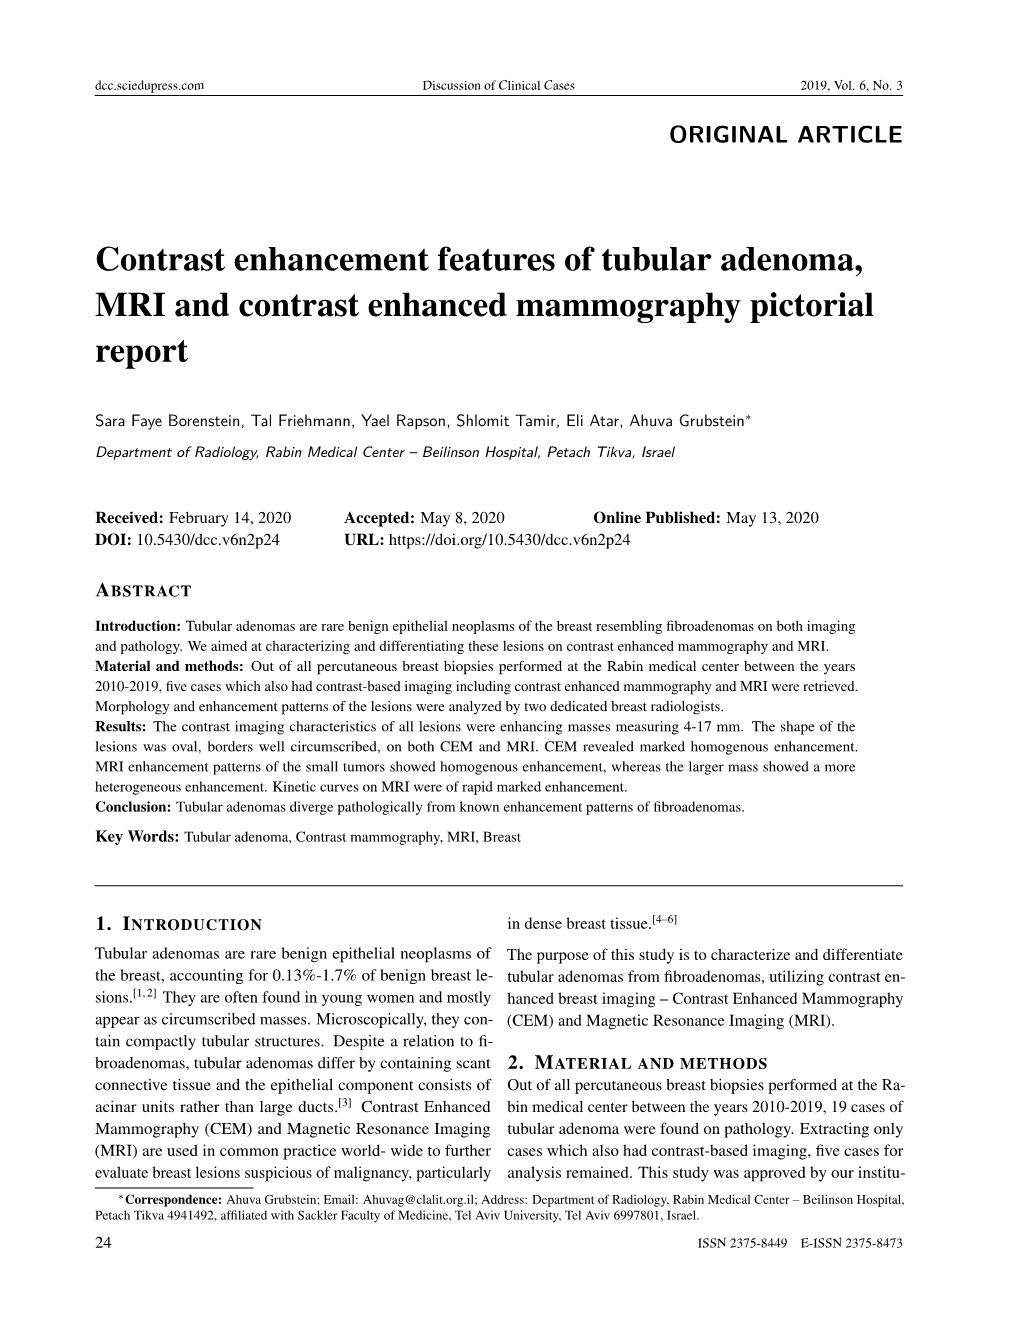 Contrast Enhancement Features of Tubular Adenoma, MRI and Contrast Enhanced Mammography Pictorial Report